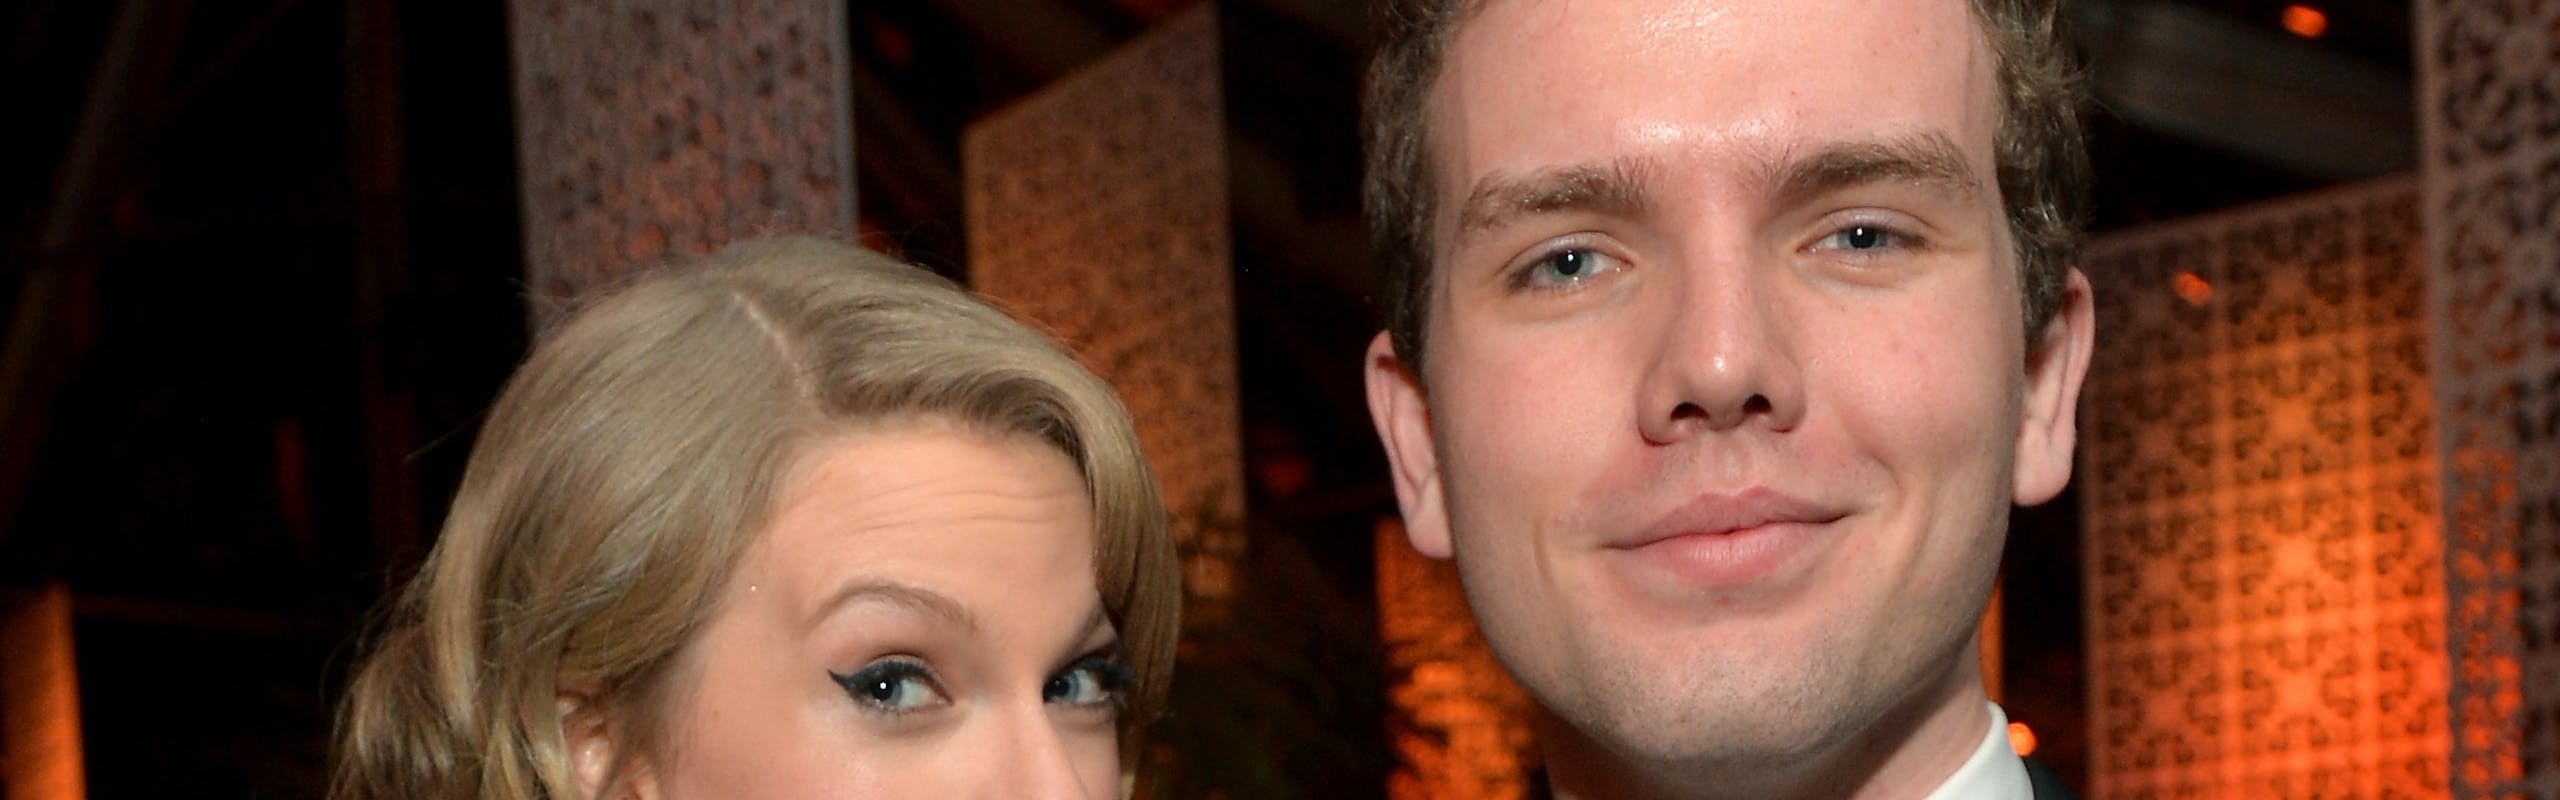 Taylor Swift's Brother Austin Swift joins his sister at 2014 Golden Globes After Party.